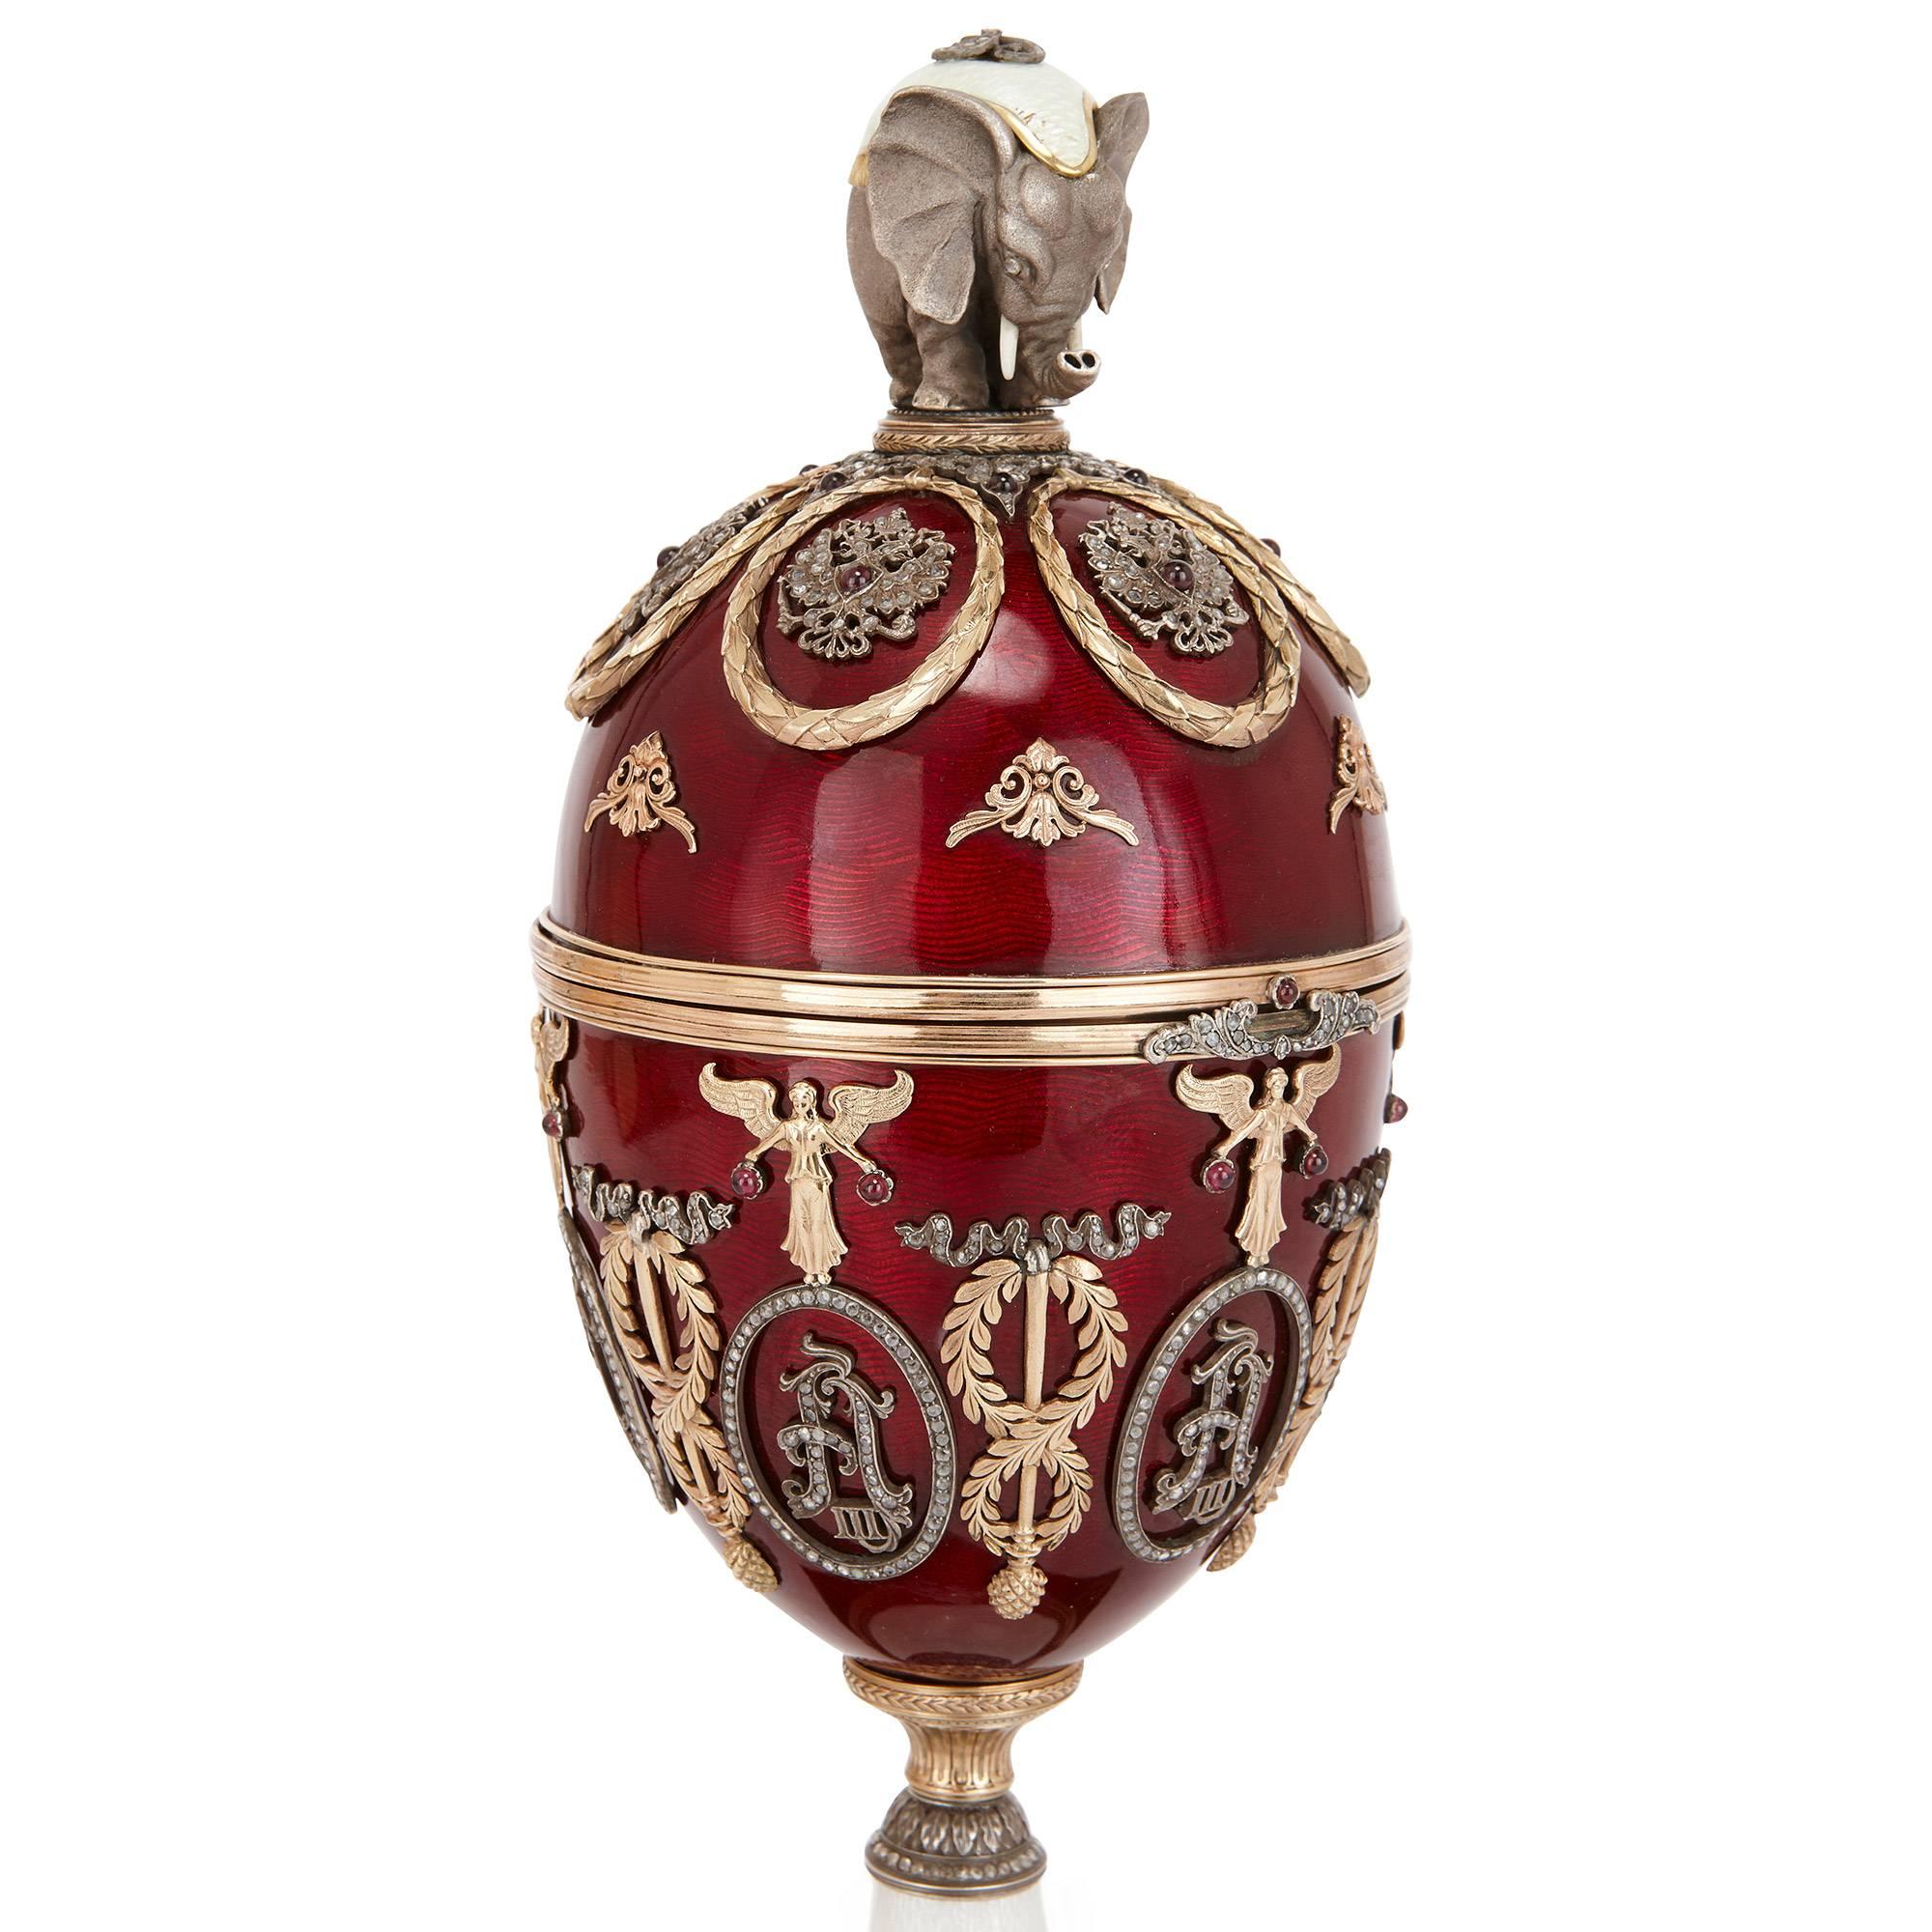 This truly exquisite egg is crafted after the notorious be jewelled eggs of Carl Faberge, the famous maker, renowned for creating the spectacular Imperial Easter eggs for the Romanov dynasty. This egg, like the original Imperial eggs, is expertly